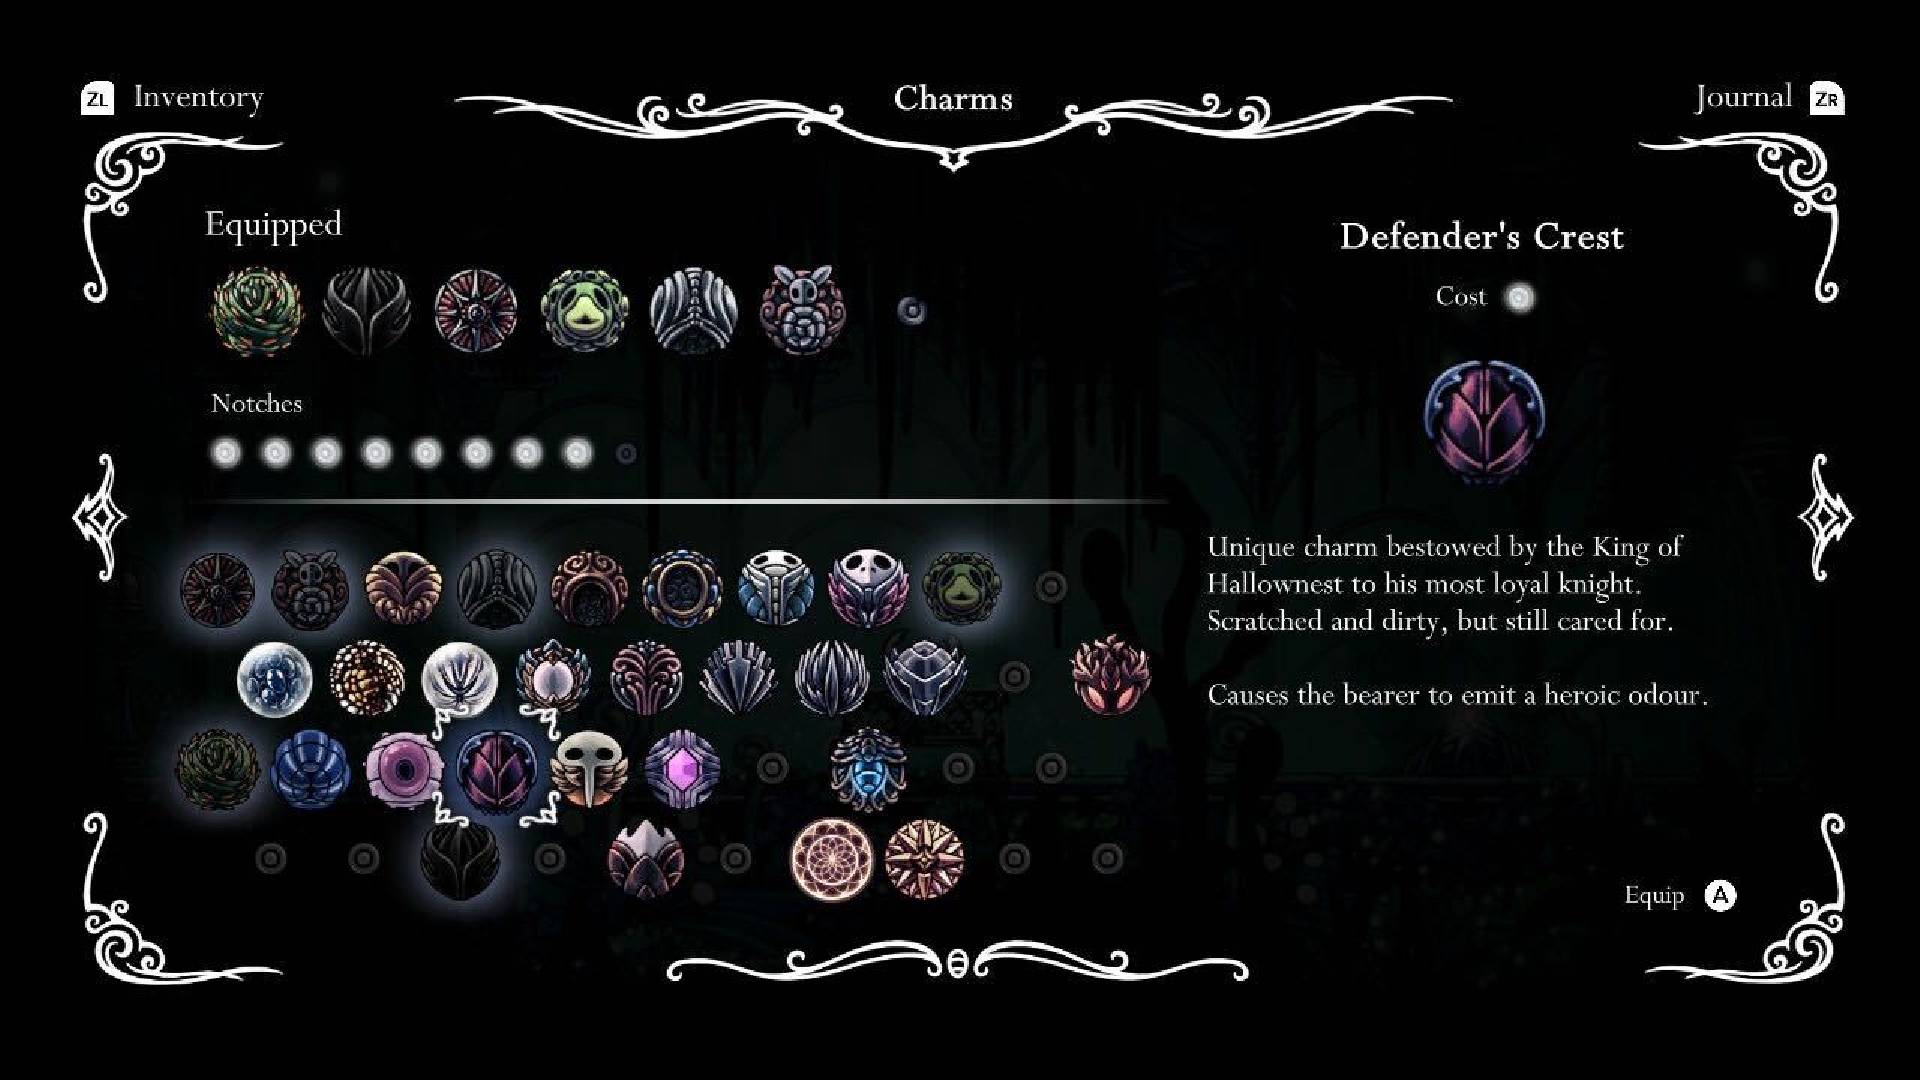 A menu shows many of the available charms in Hollow Knight 